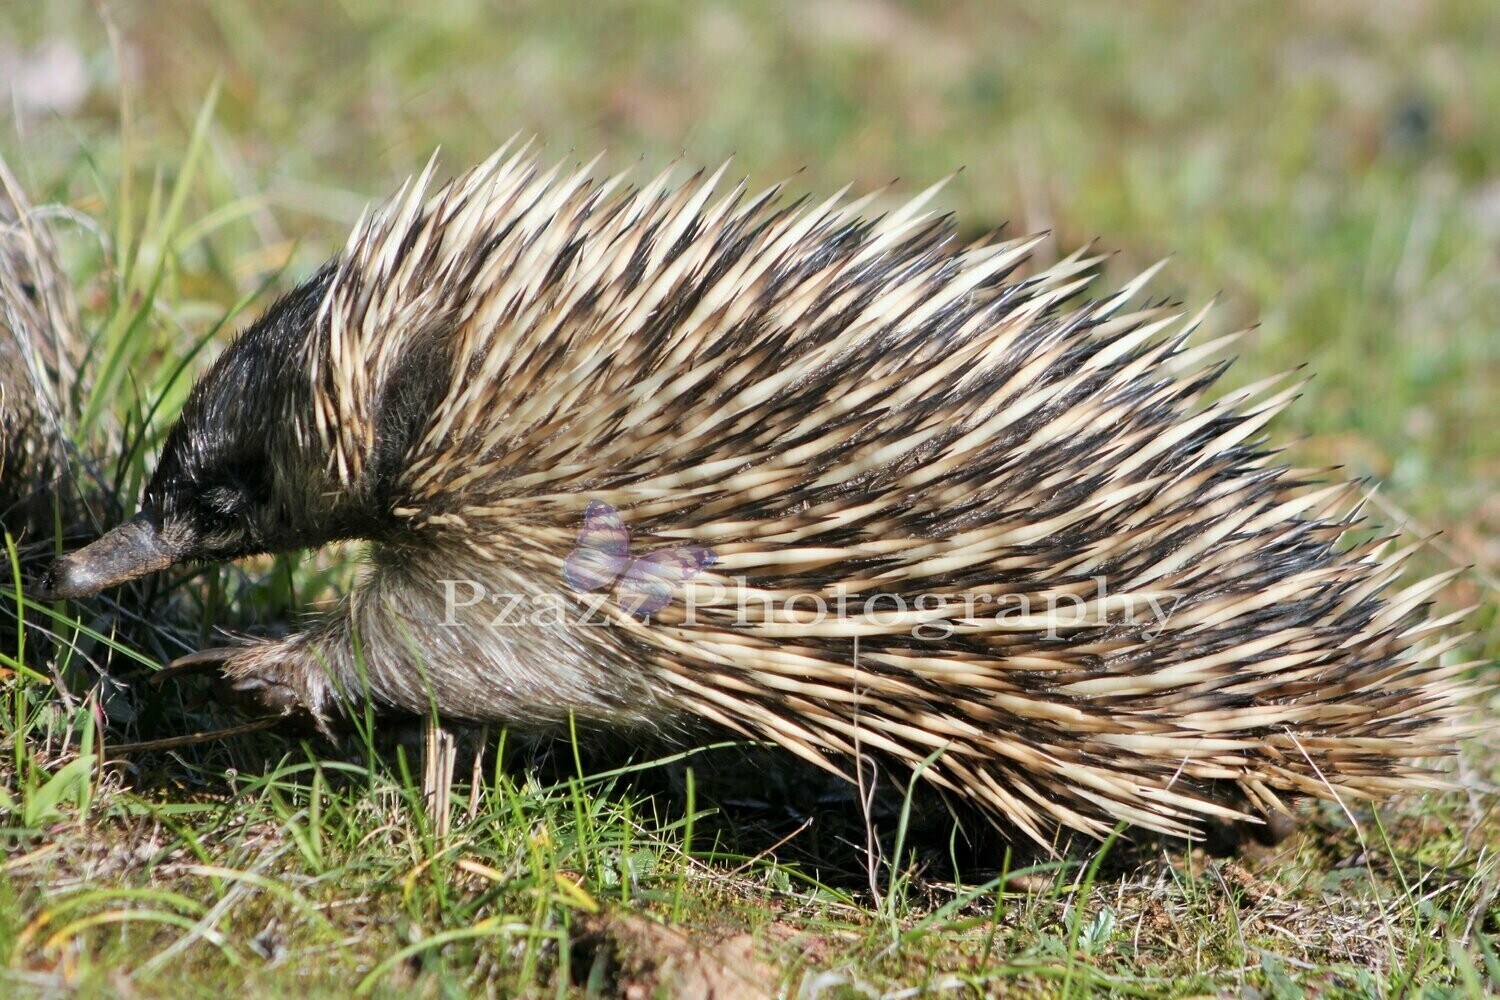 Pzazz Photography - Echidna - Specially ordered for you. Delivery is approximately 4 - 6 weeks.